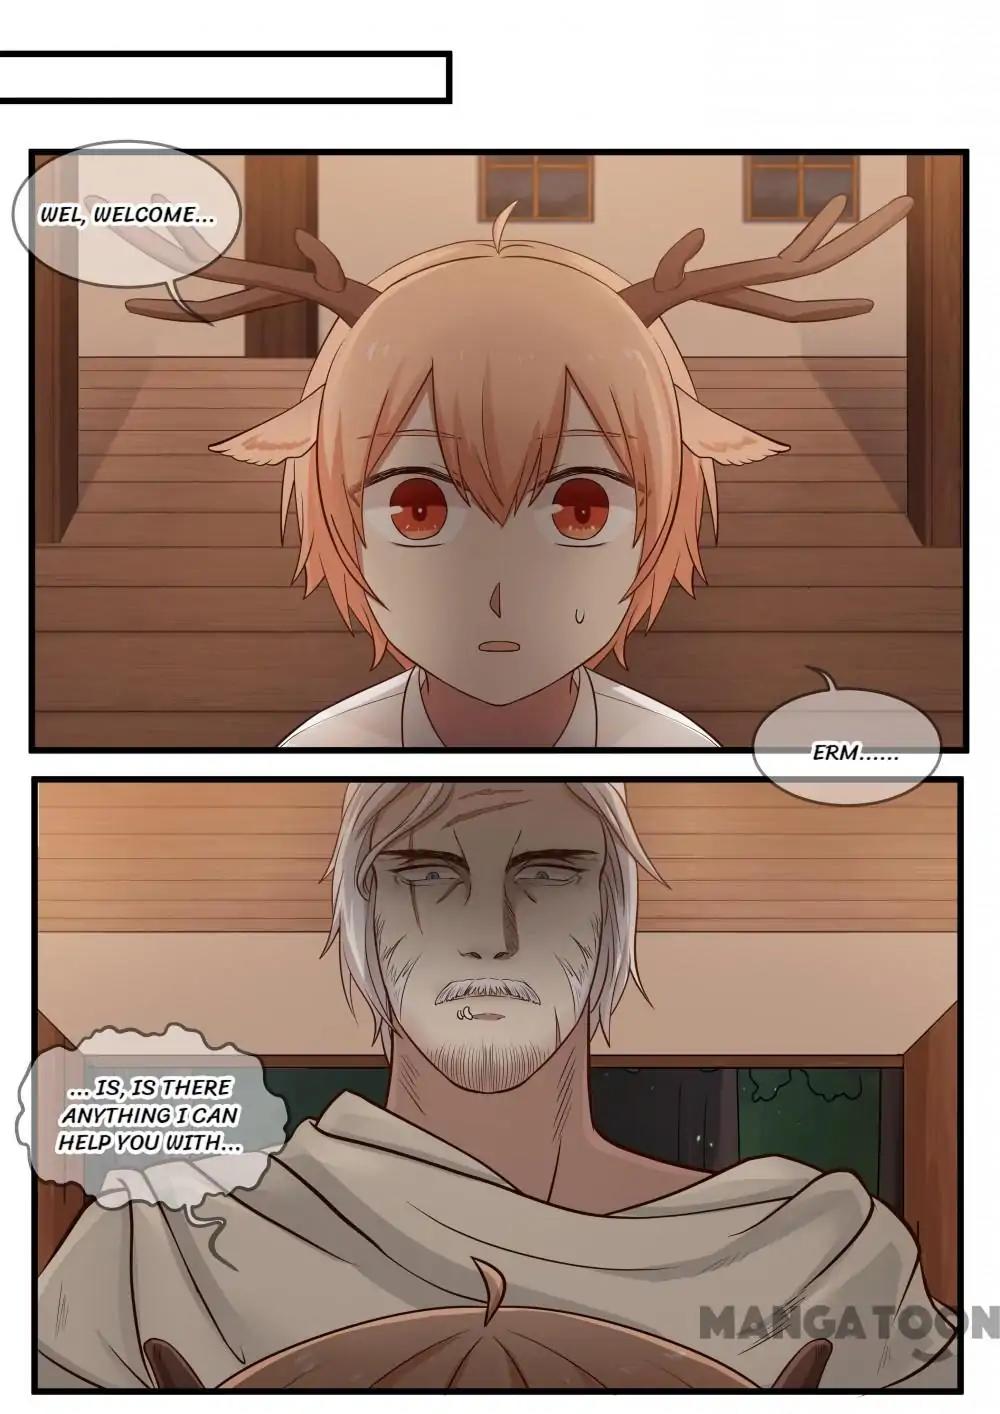 The Tale Of Deer In The Woods - Page 1